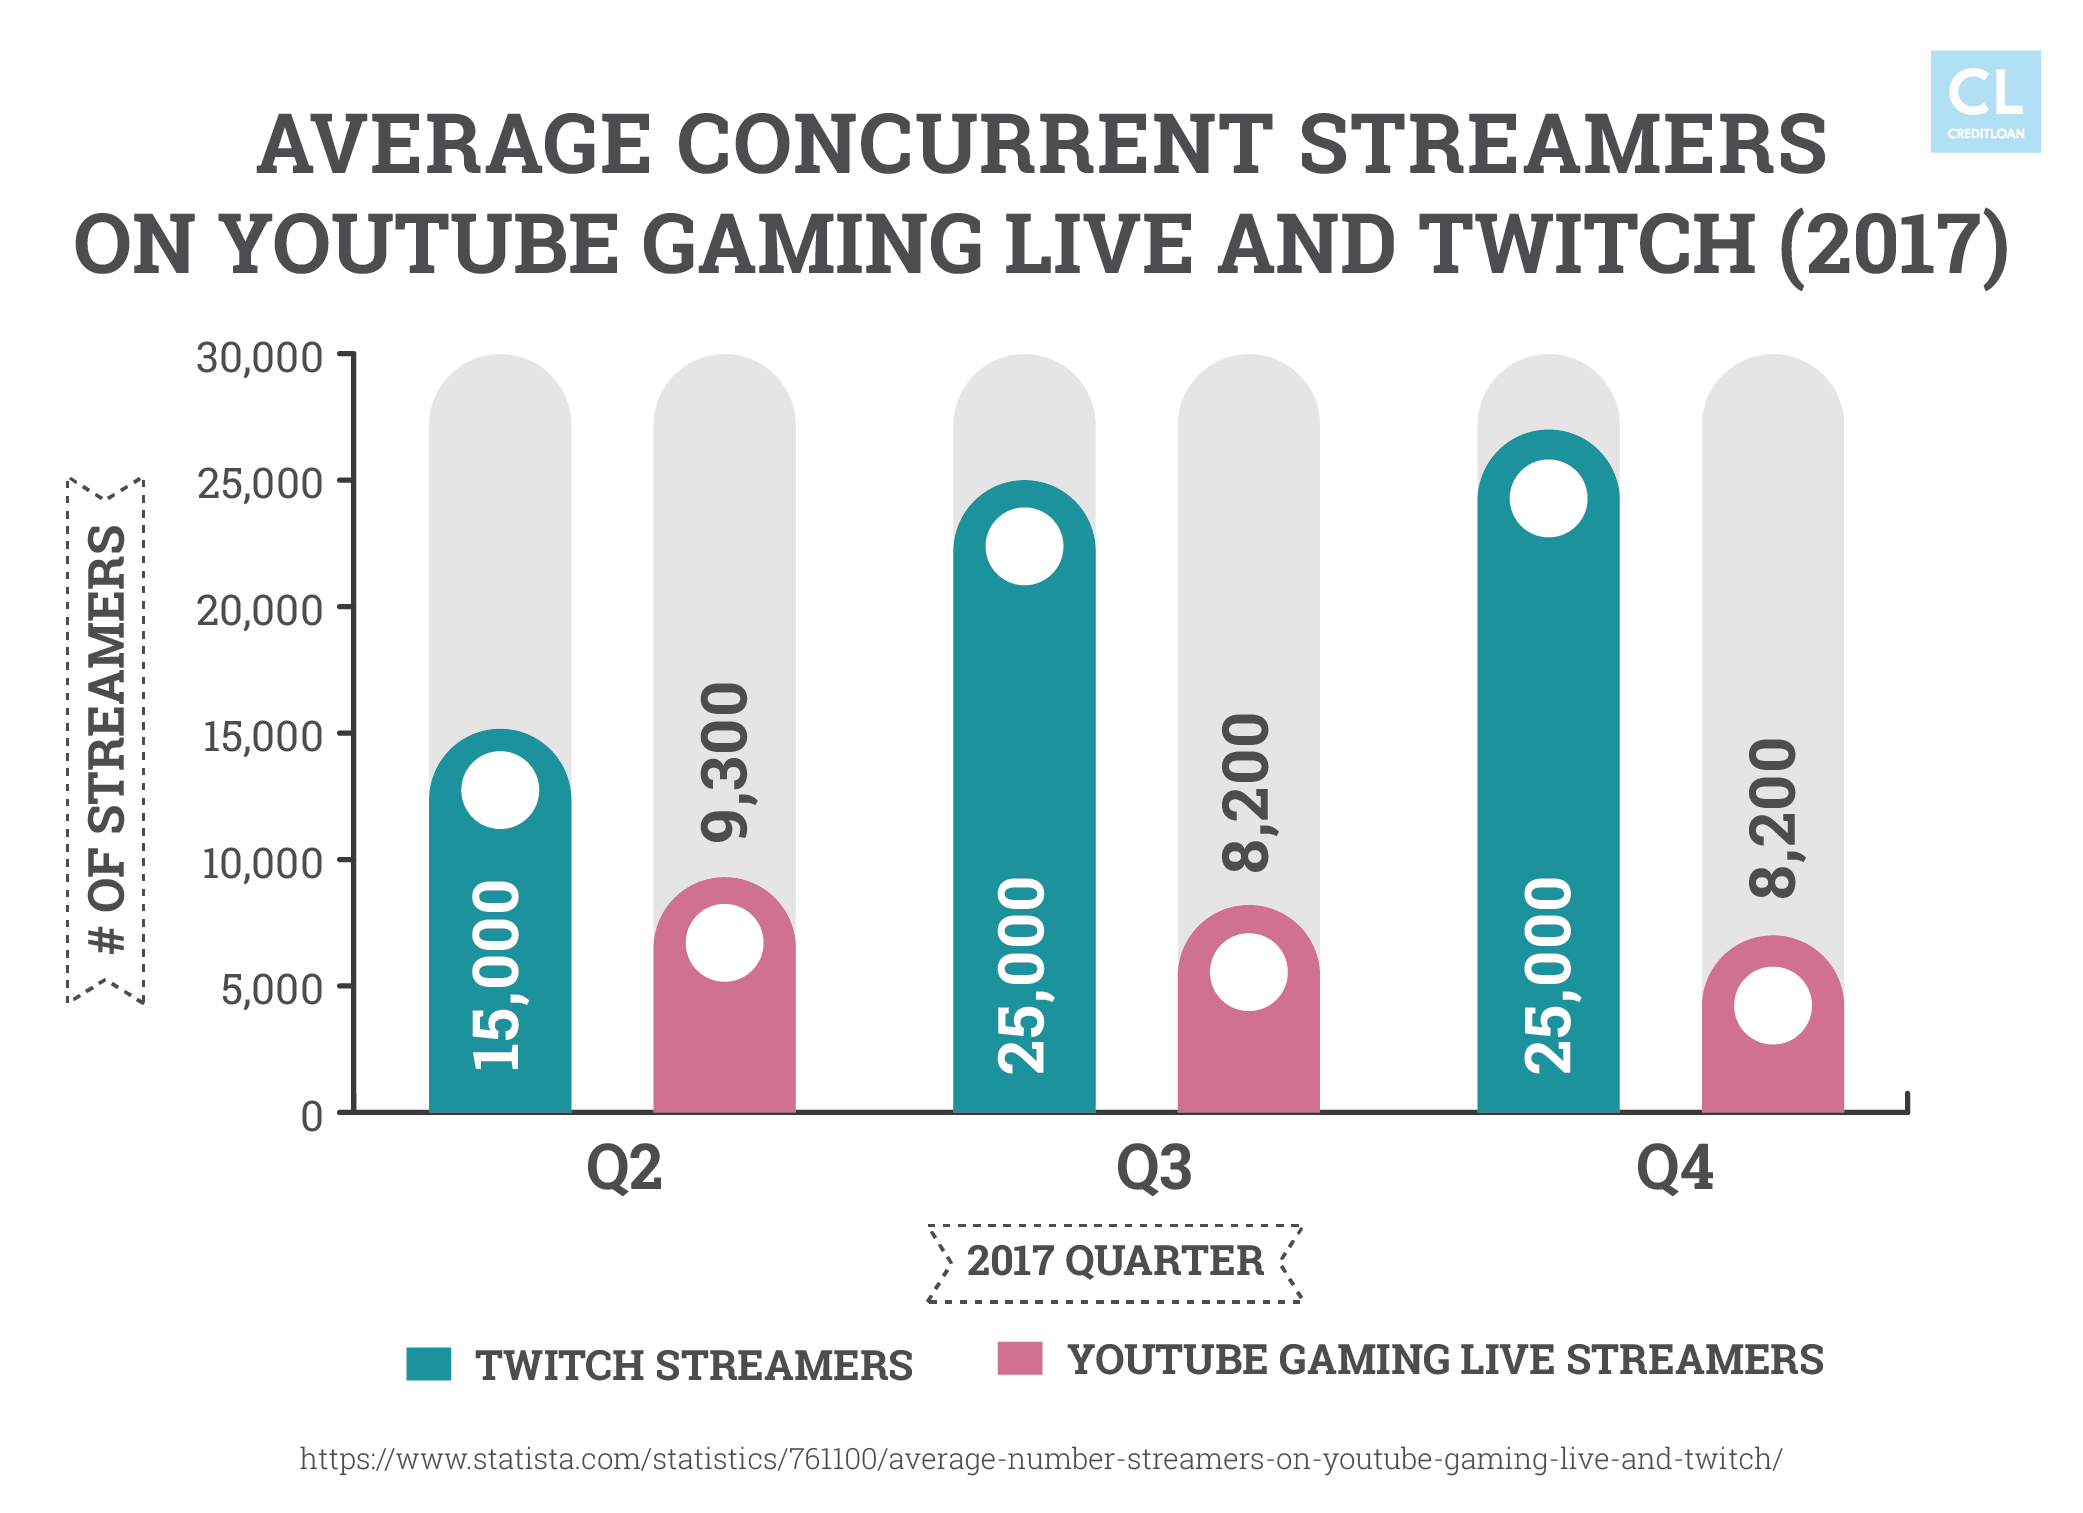 Average Concurrent Streamers on YouTube Gaming Live and Twitch (2017)